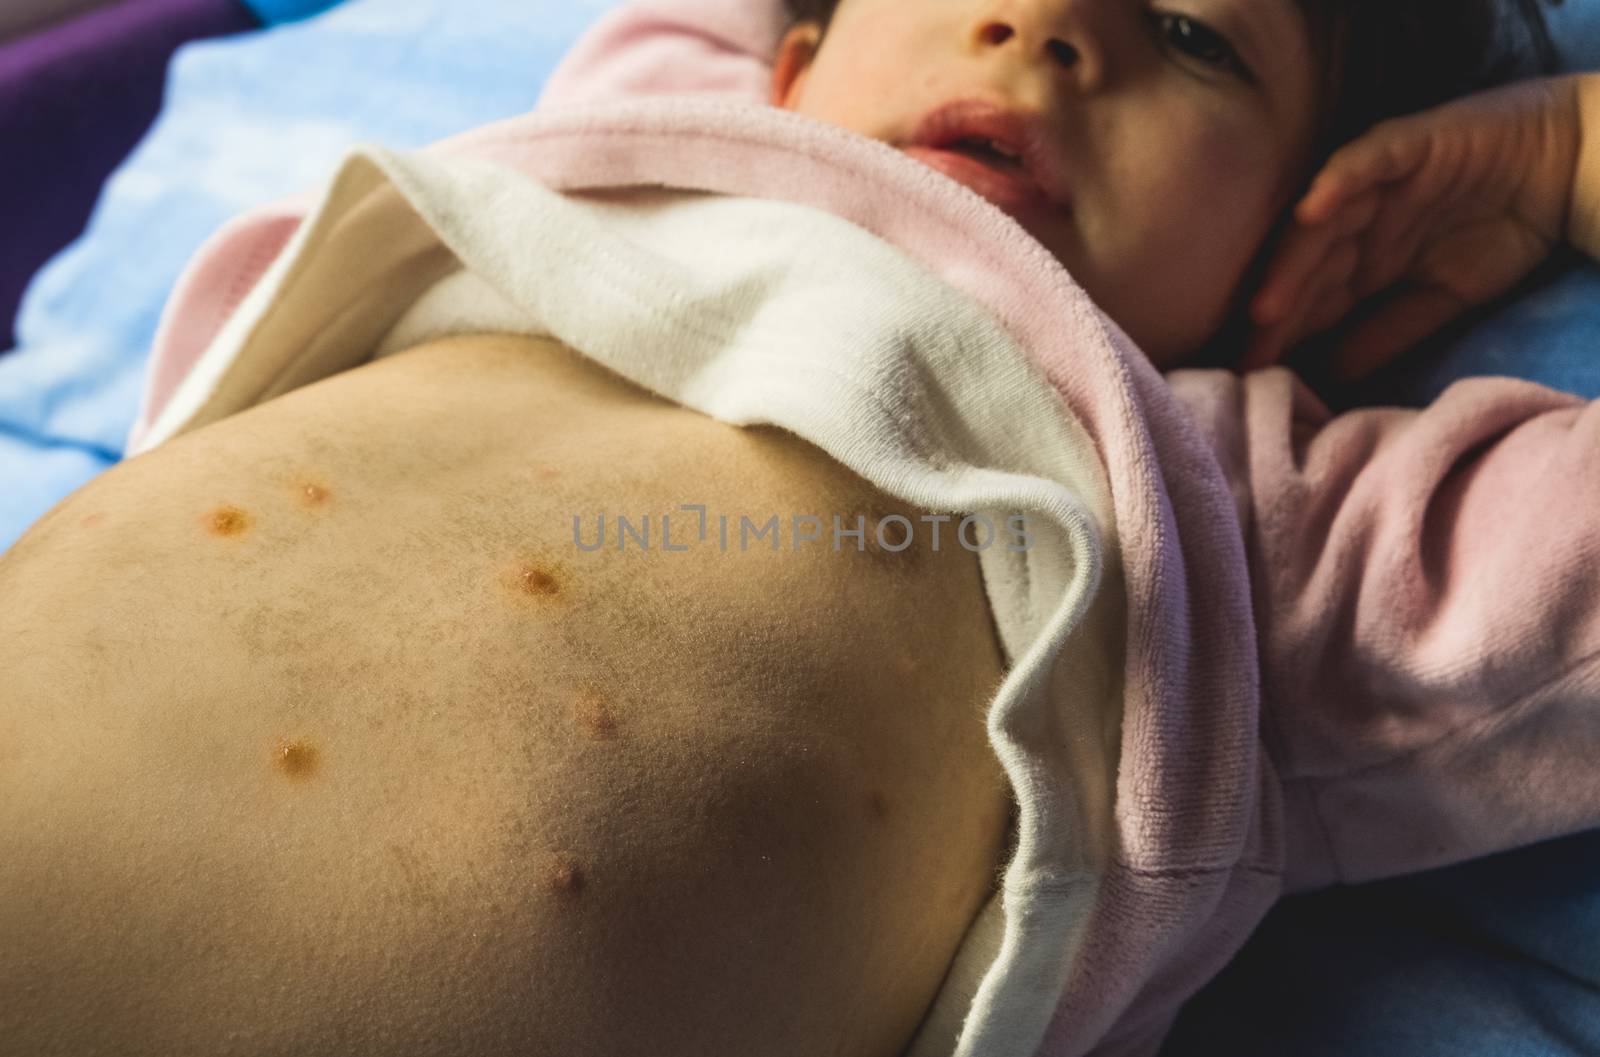 first spots of chicken pox on the baby's tummy by LucaLorenzelli